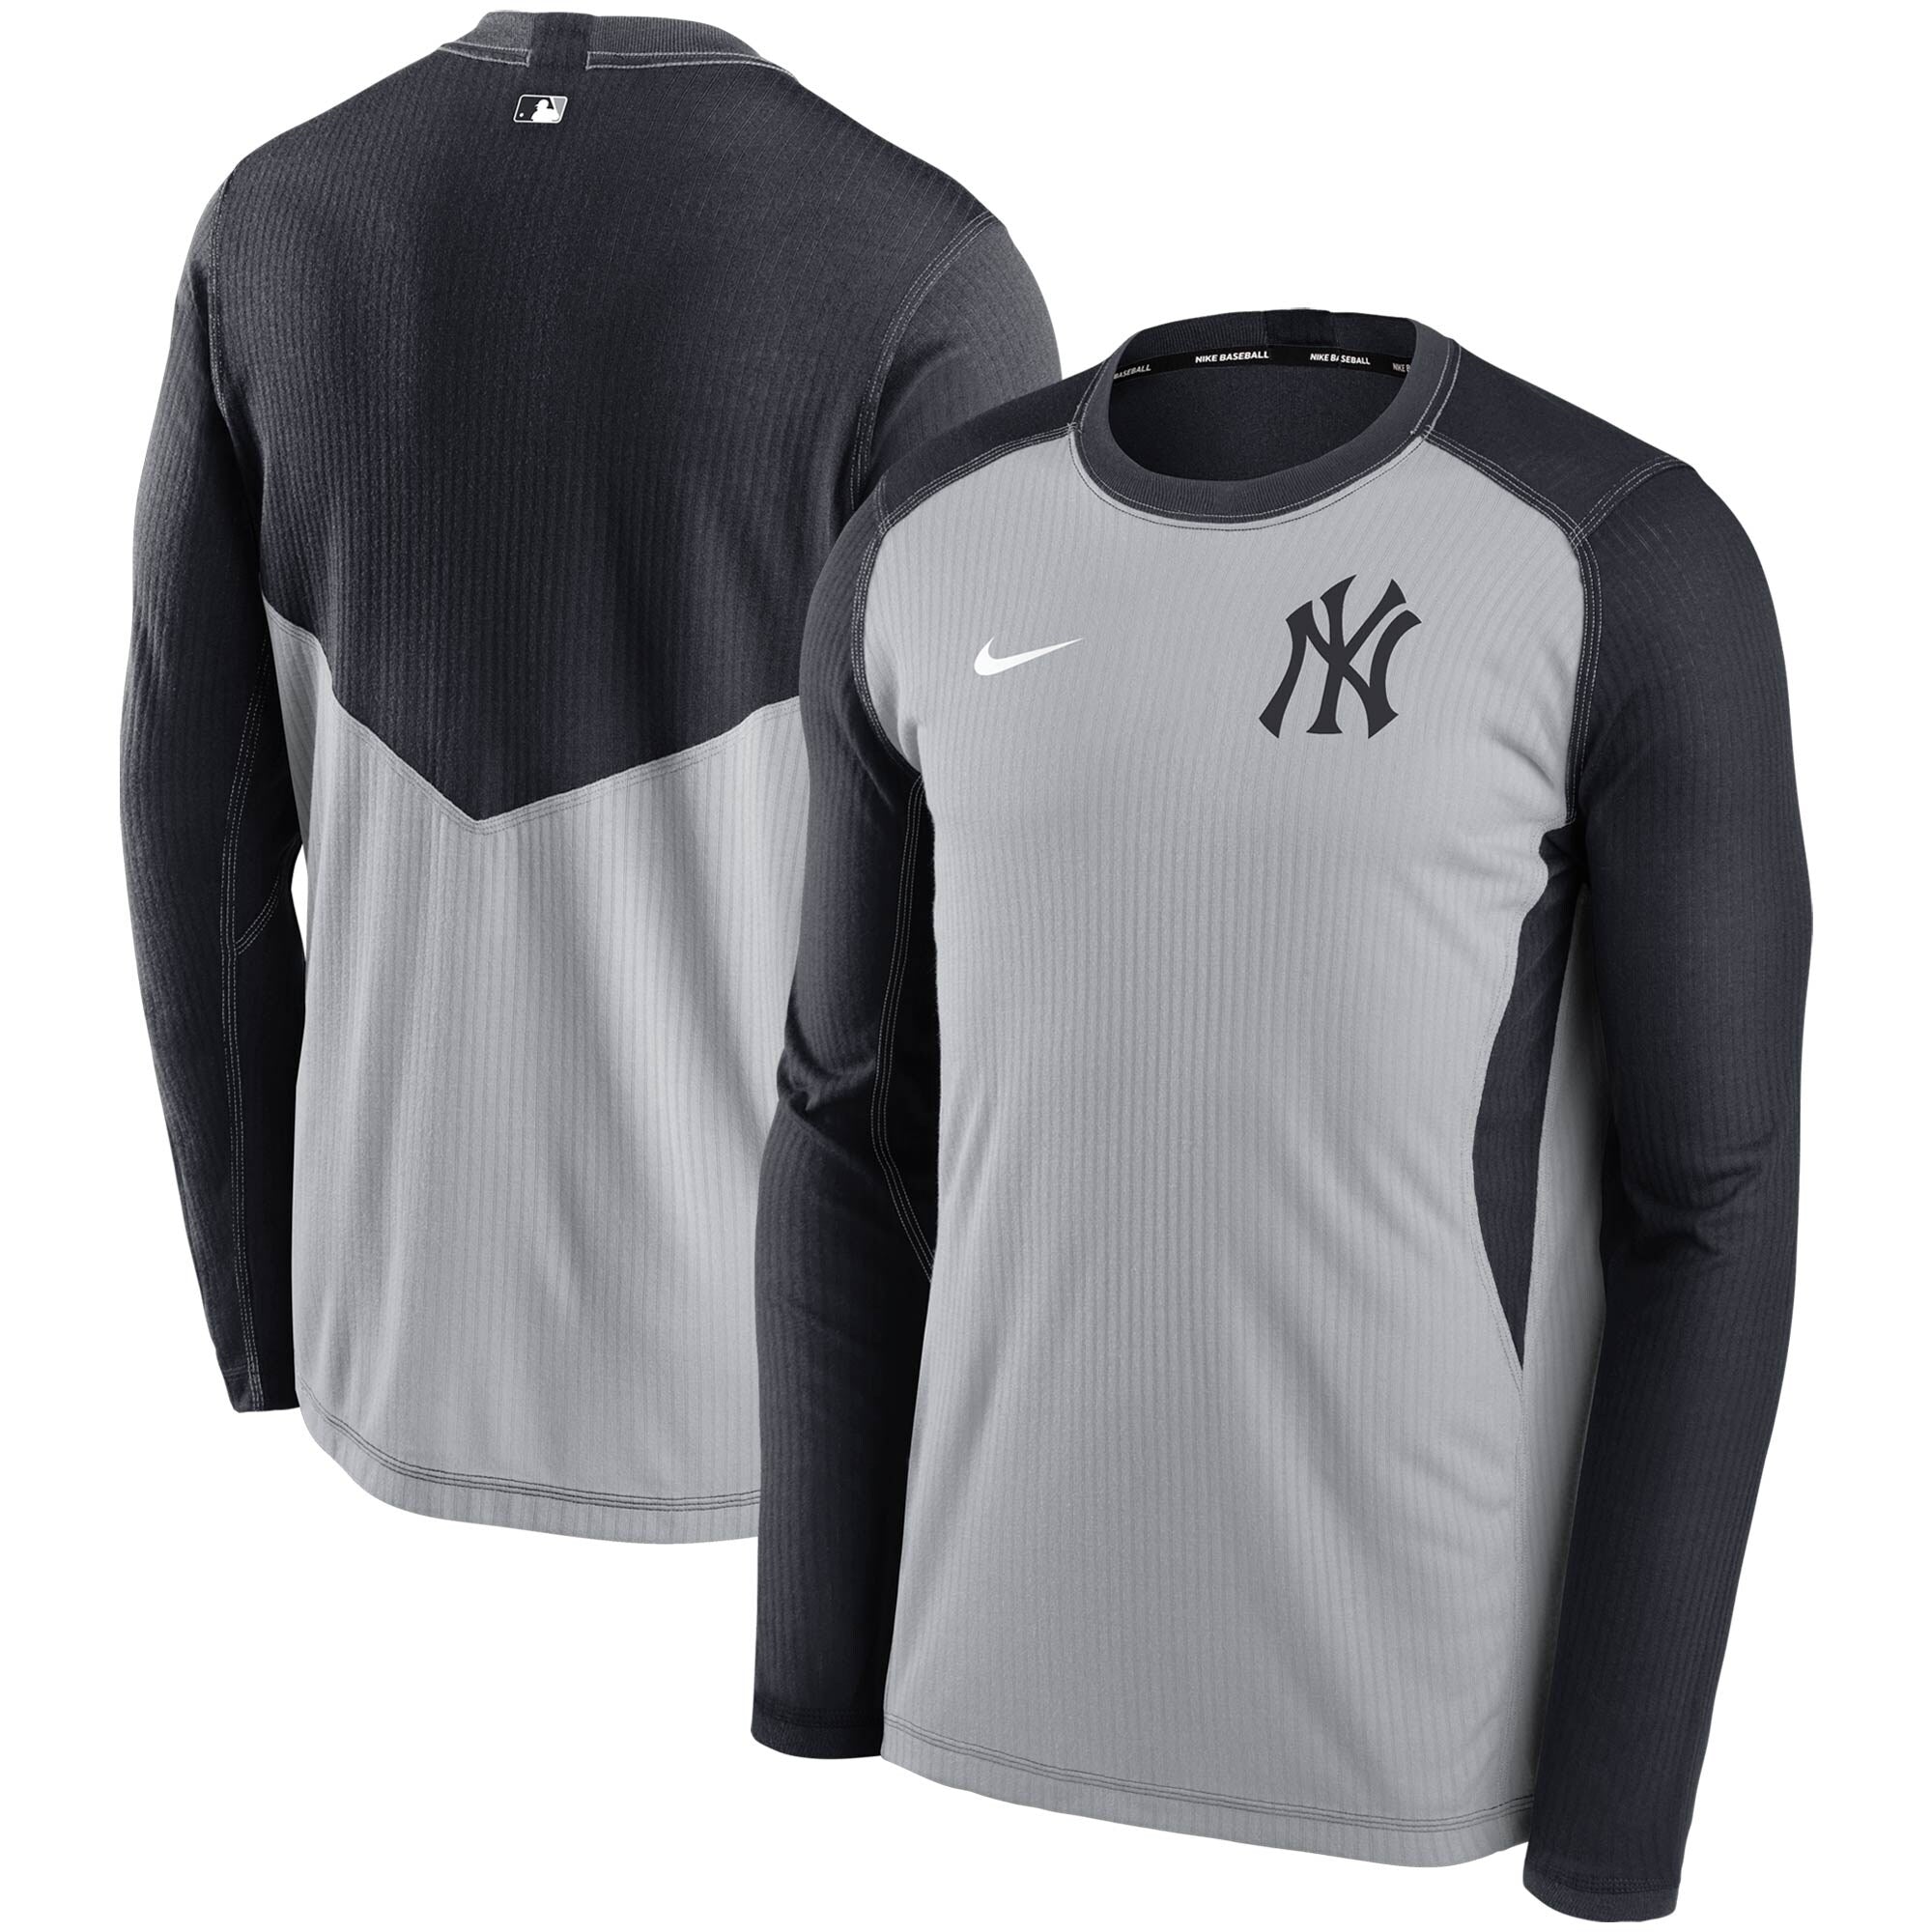 Men's Nike Yankees Grey & Navy Authentic Collection Thermal Crew